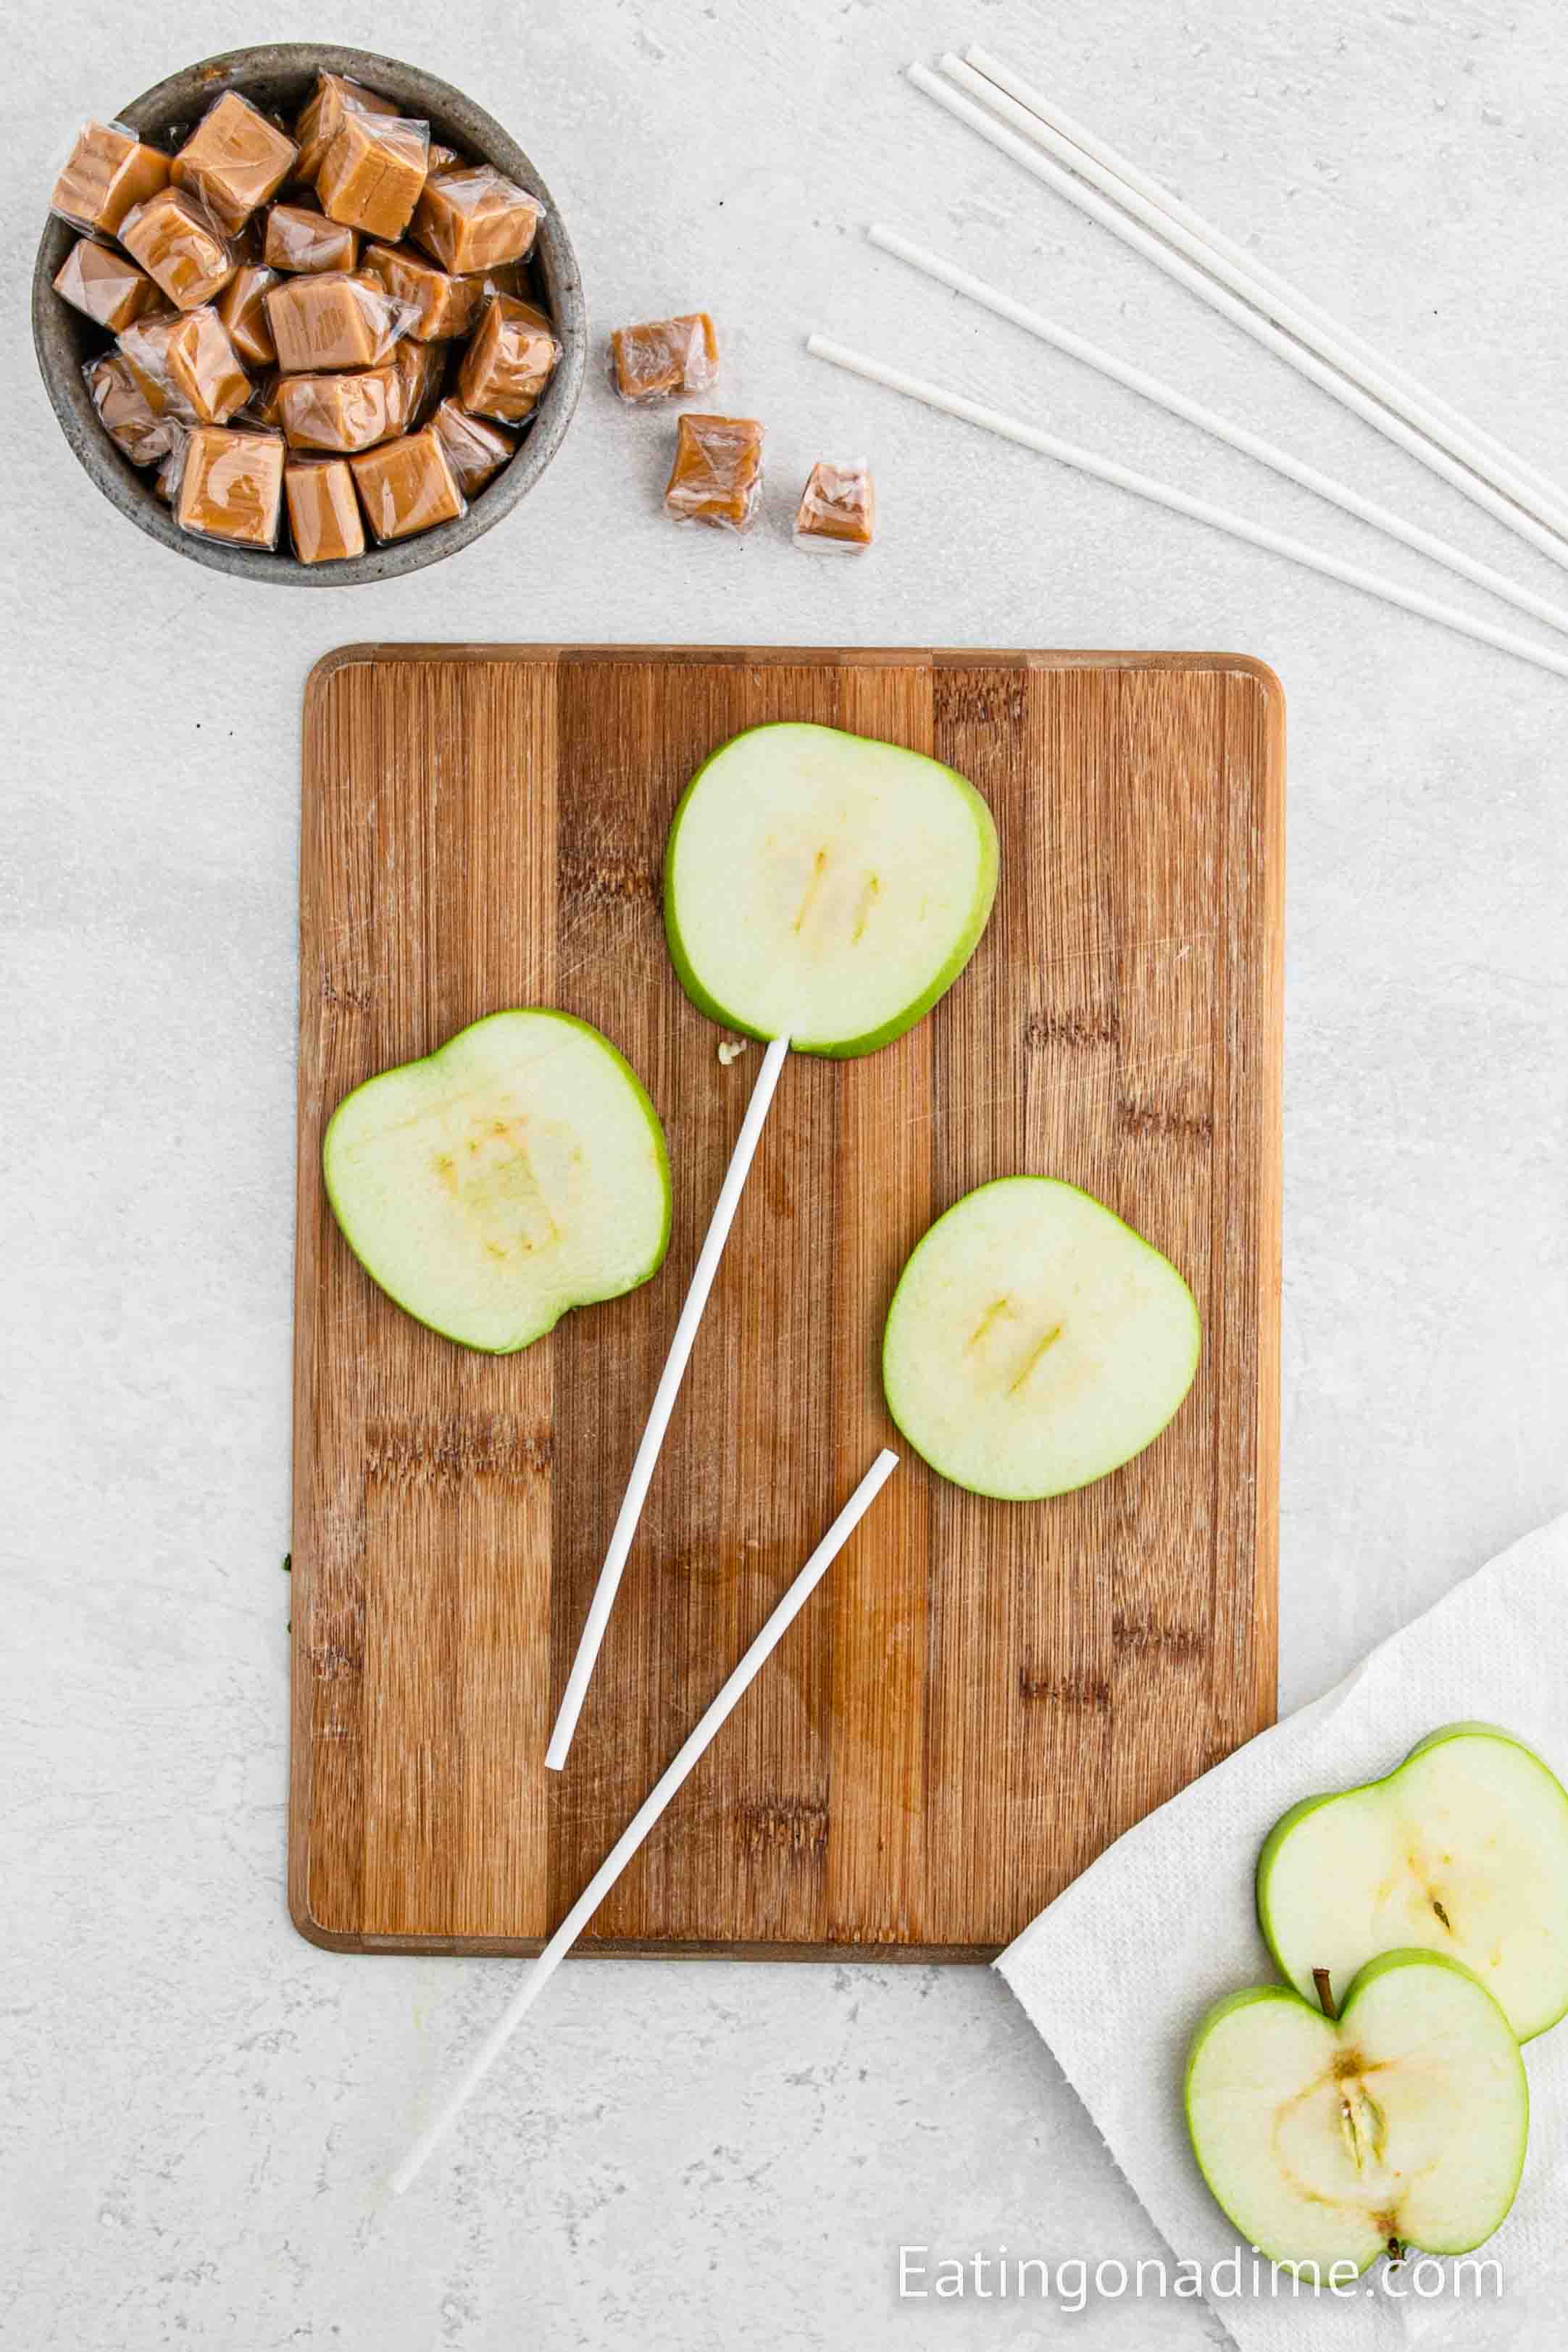 Inserting apple slices with sticks